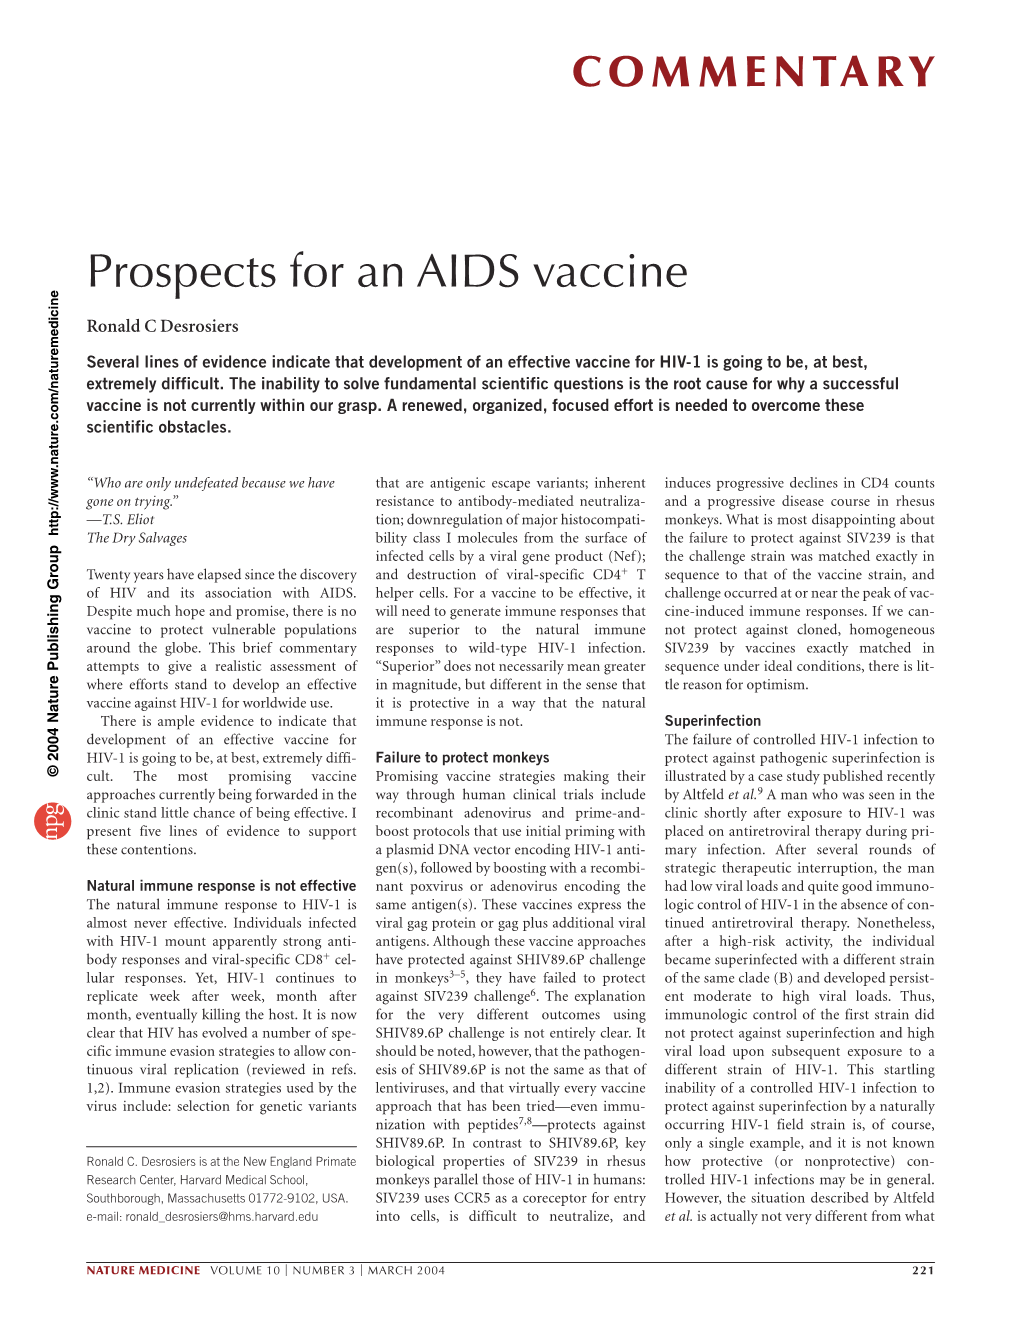 Prospects for an AIDS Vaccine